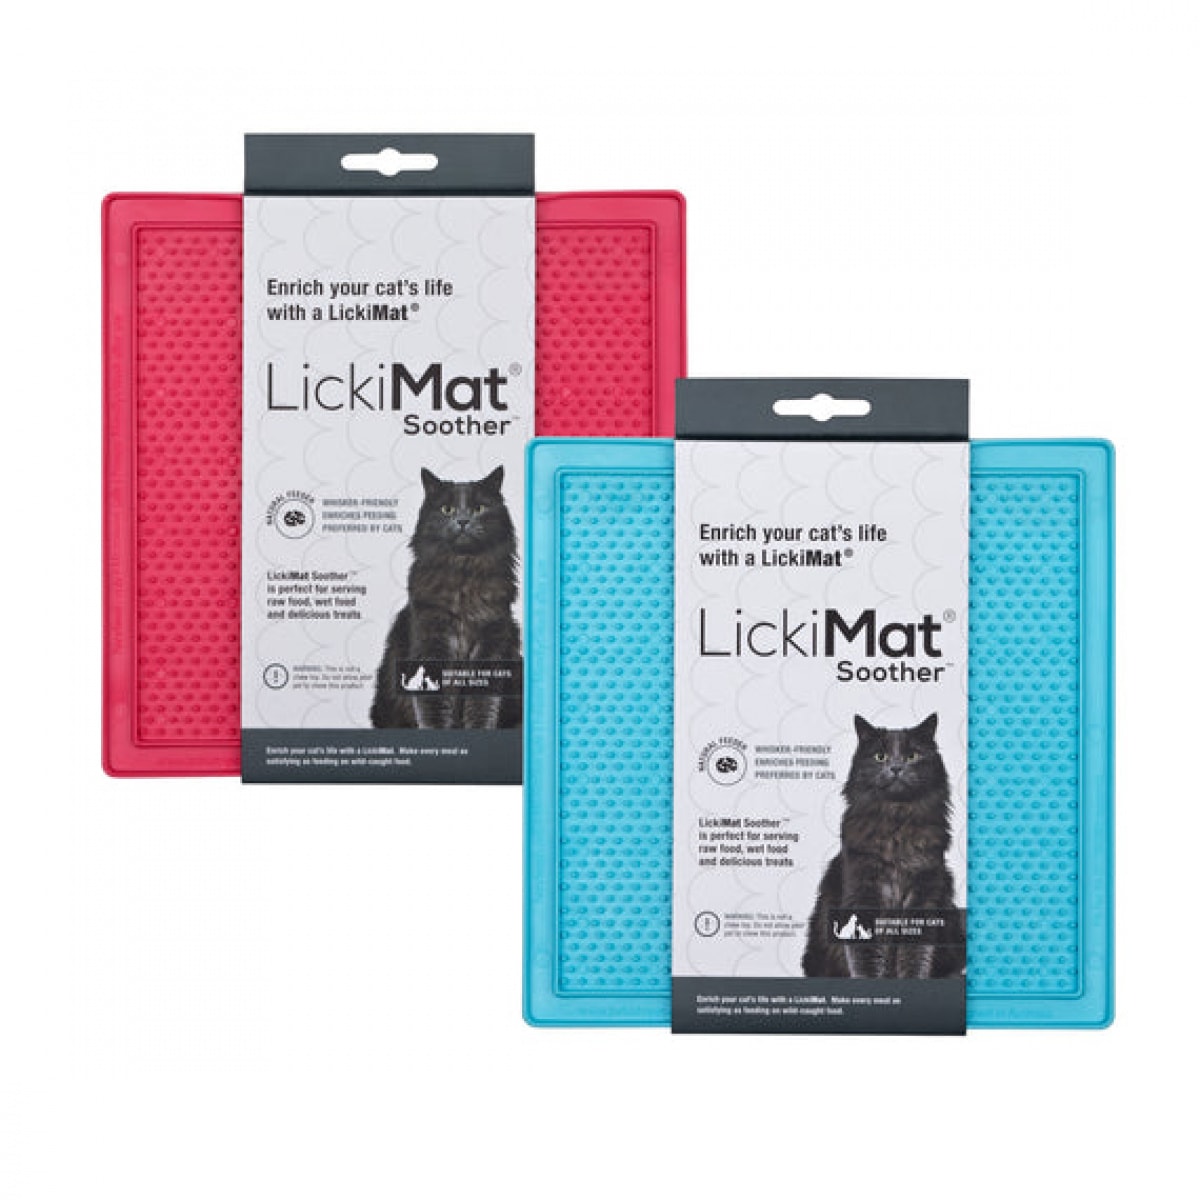 Lickimat Soother Cat – Pawfect Supplies Ltd Product Image